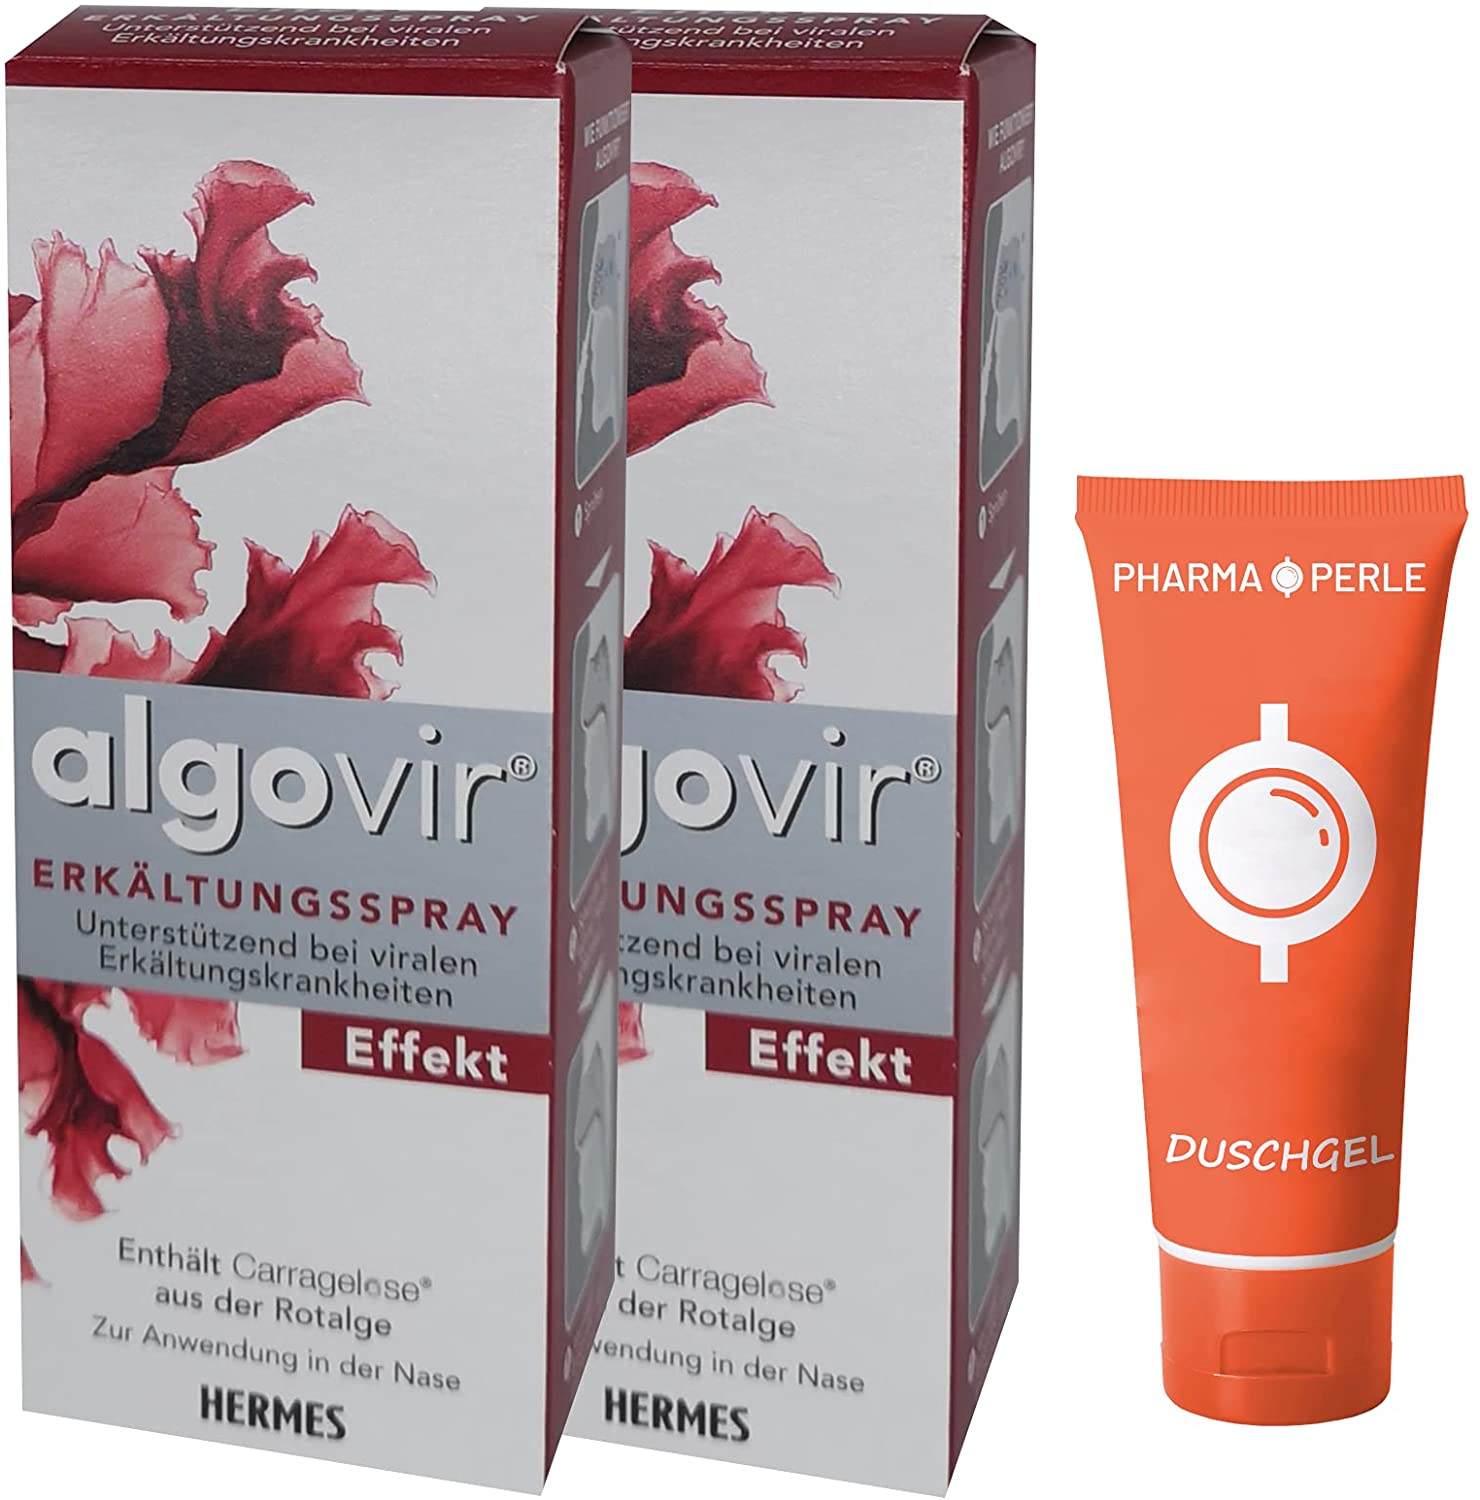 ALGOVIR Set of 2 Cold Spray Effect with Marine Active Ingredients from Red Algae, for Treating Cold Disorders (2 x 20 ml Solution), Free Bundle with Pharma Perle Shower Gel